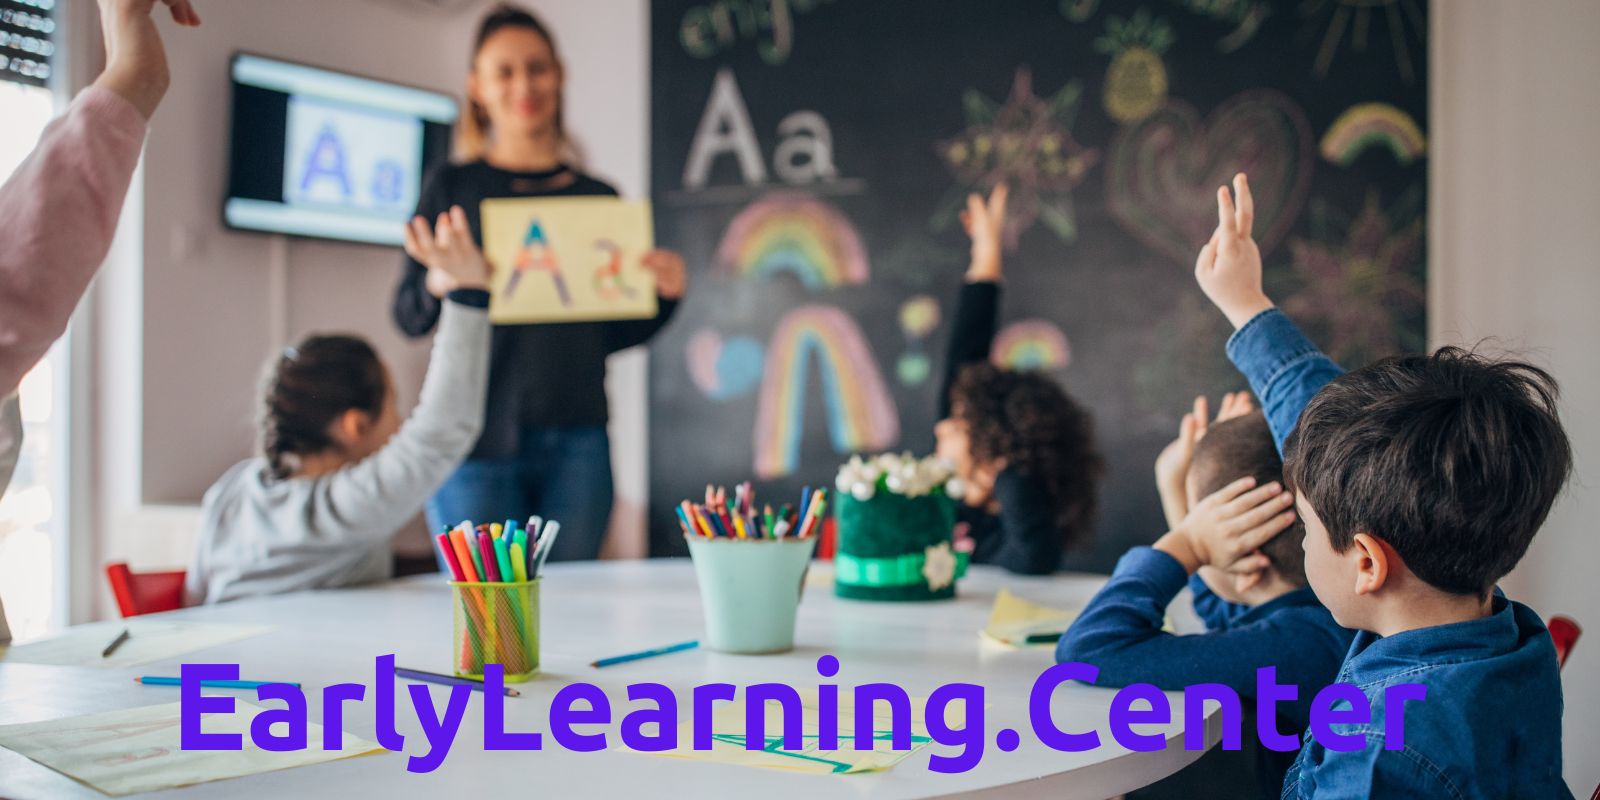 EarlyLearning.Center